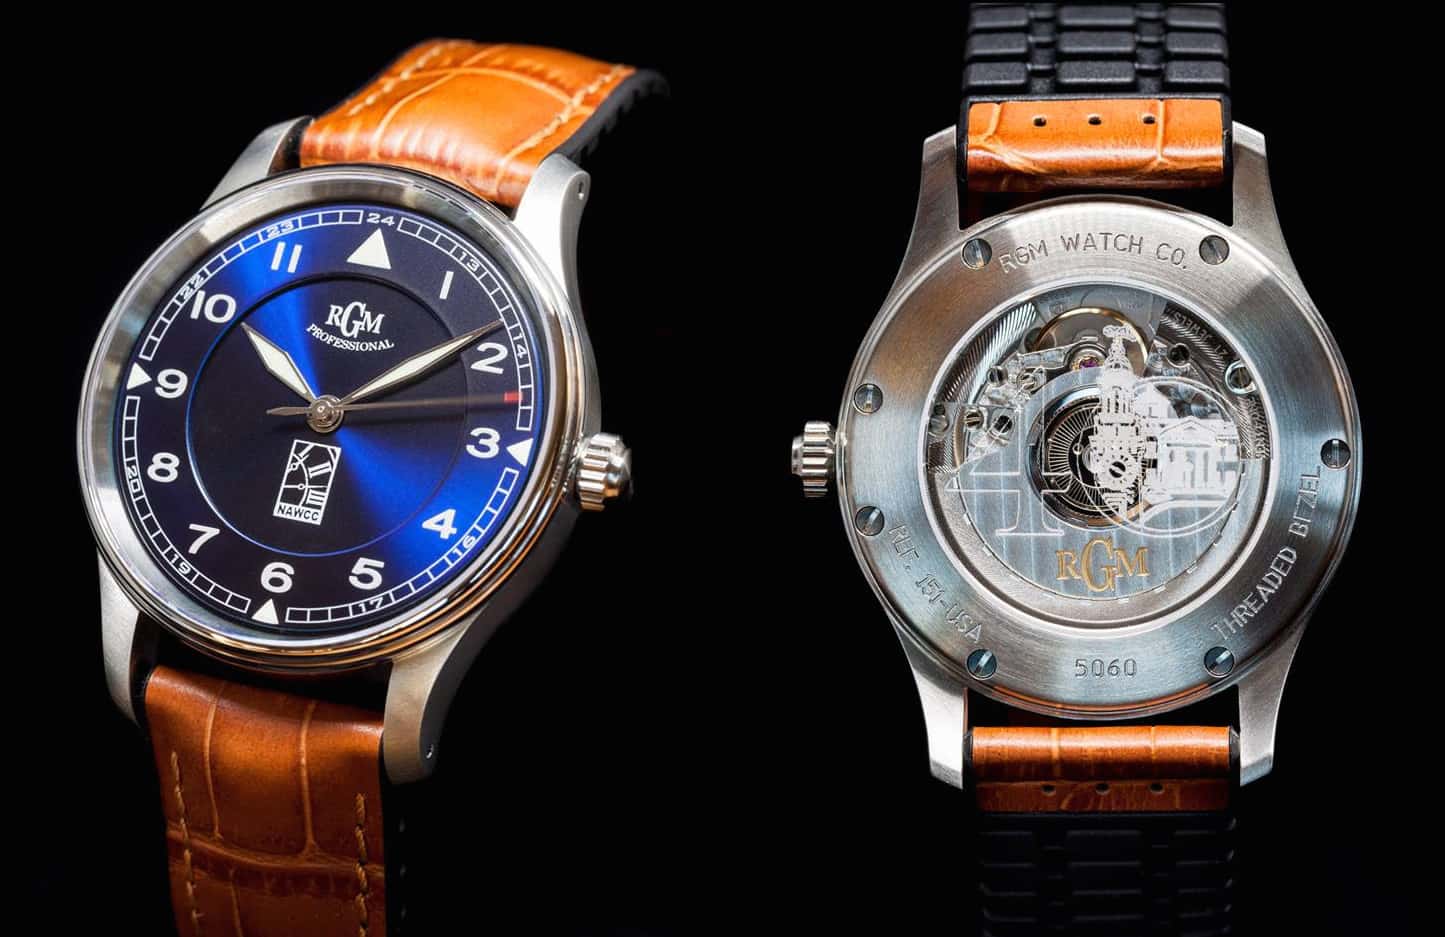 NAWCC and RGM Auction One-of-a-Kind Watch to Commemorate Museum’s 40th Anniversary